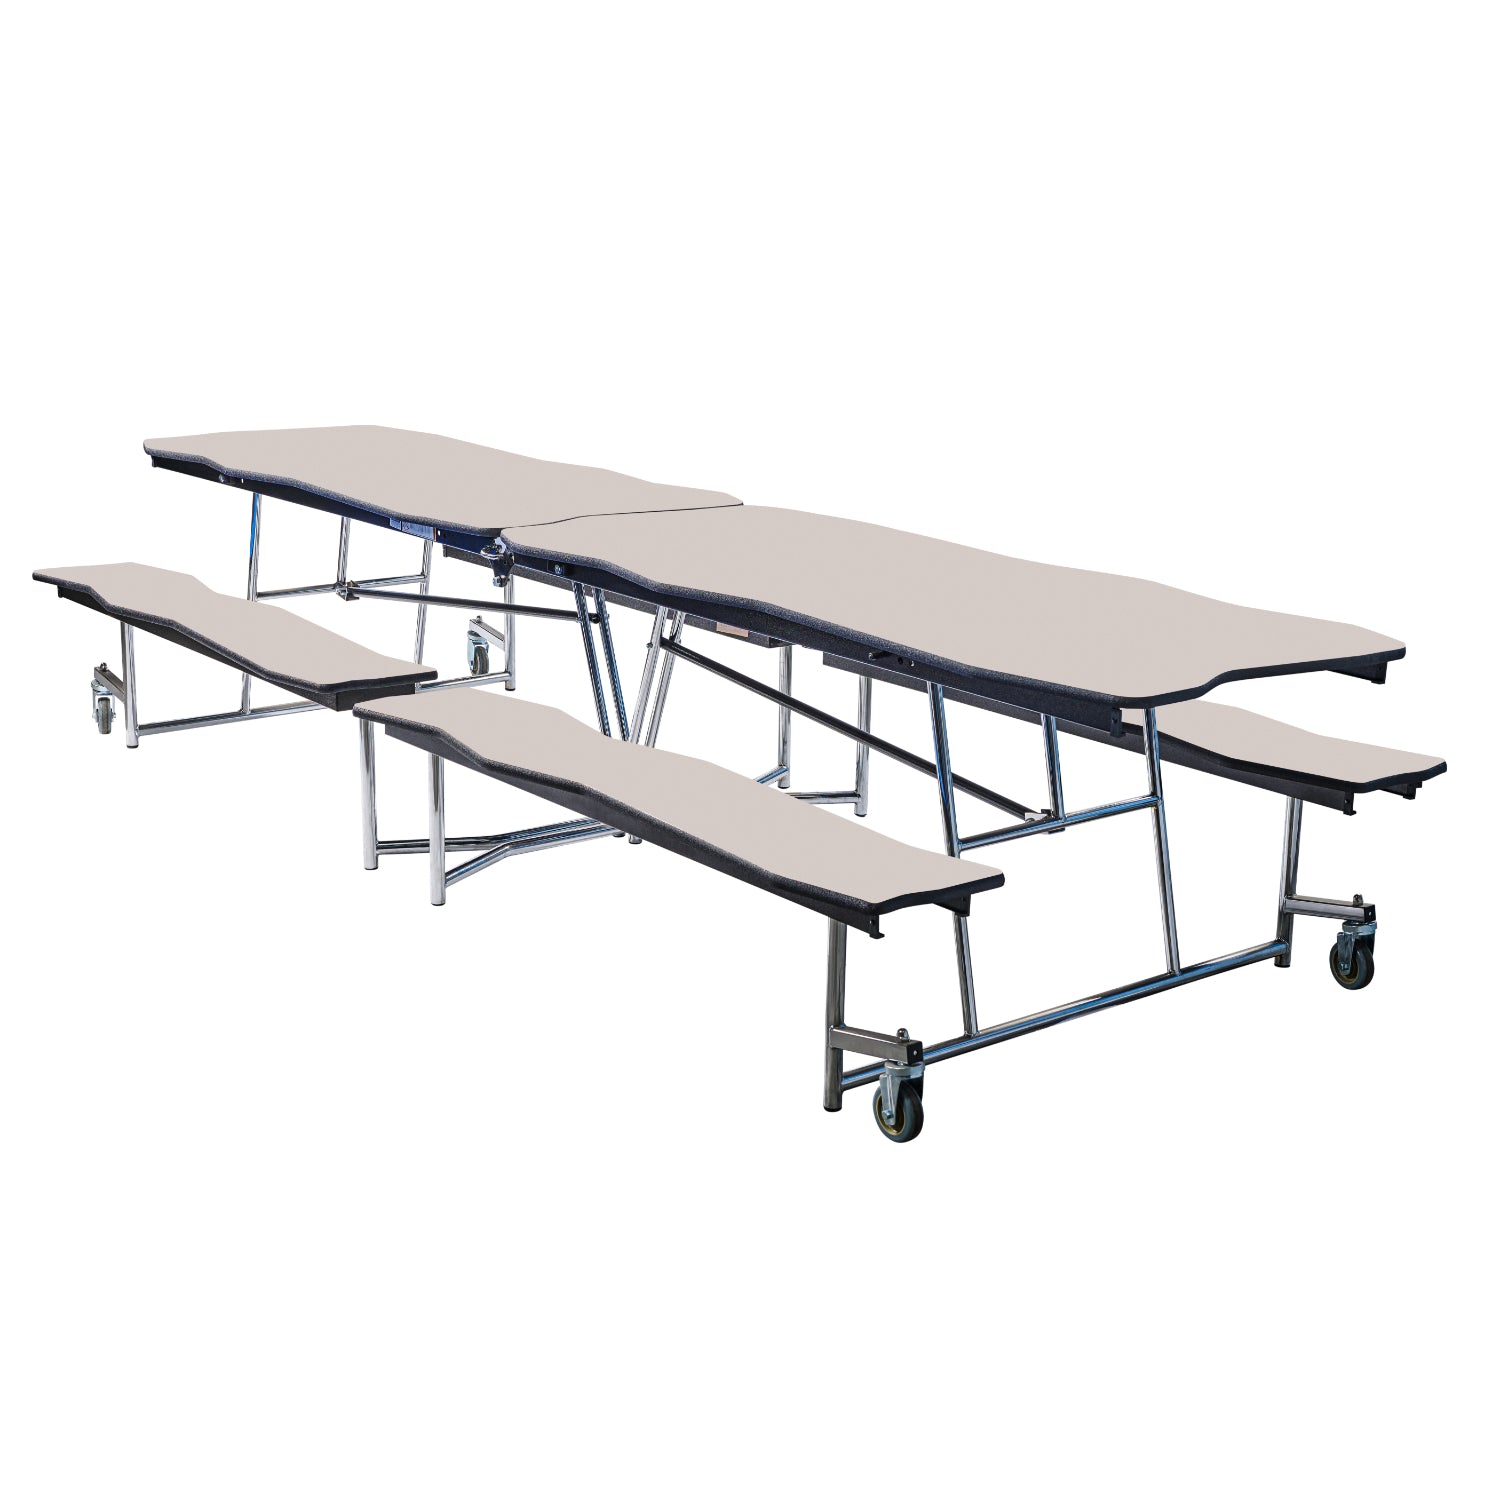 Mobile Cafeteria Table with Benches, 10' Bedrock, Particleboard Core, Vinyl T-Mold Edge, Chrome Frame